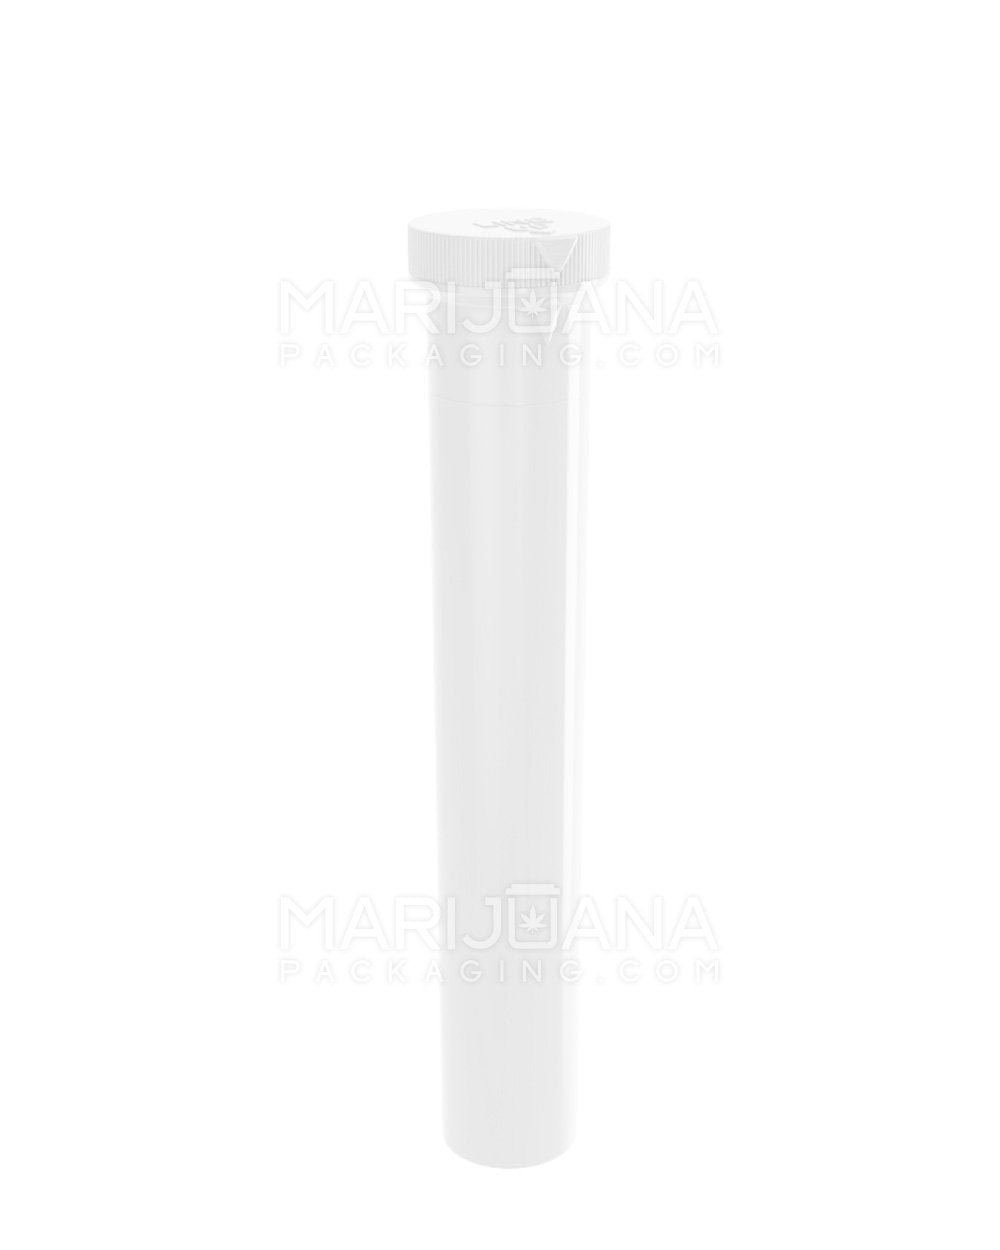 Child Resistant King Size ‘Line-Up Arrow’ Pre-Roll Tubes | 116mm - Opaque White Plastic | Sample - 1